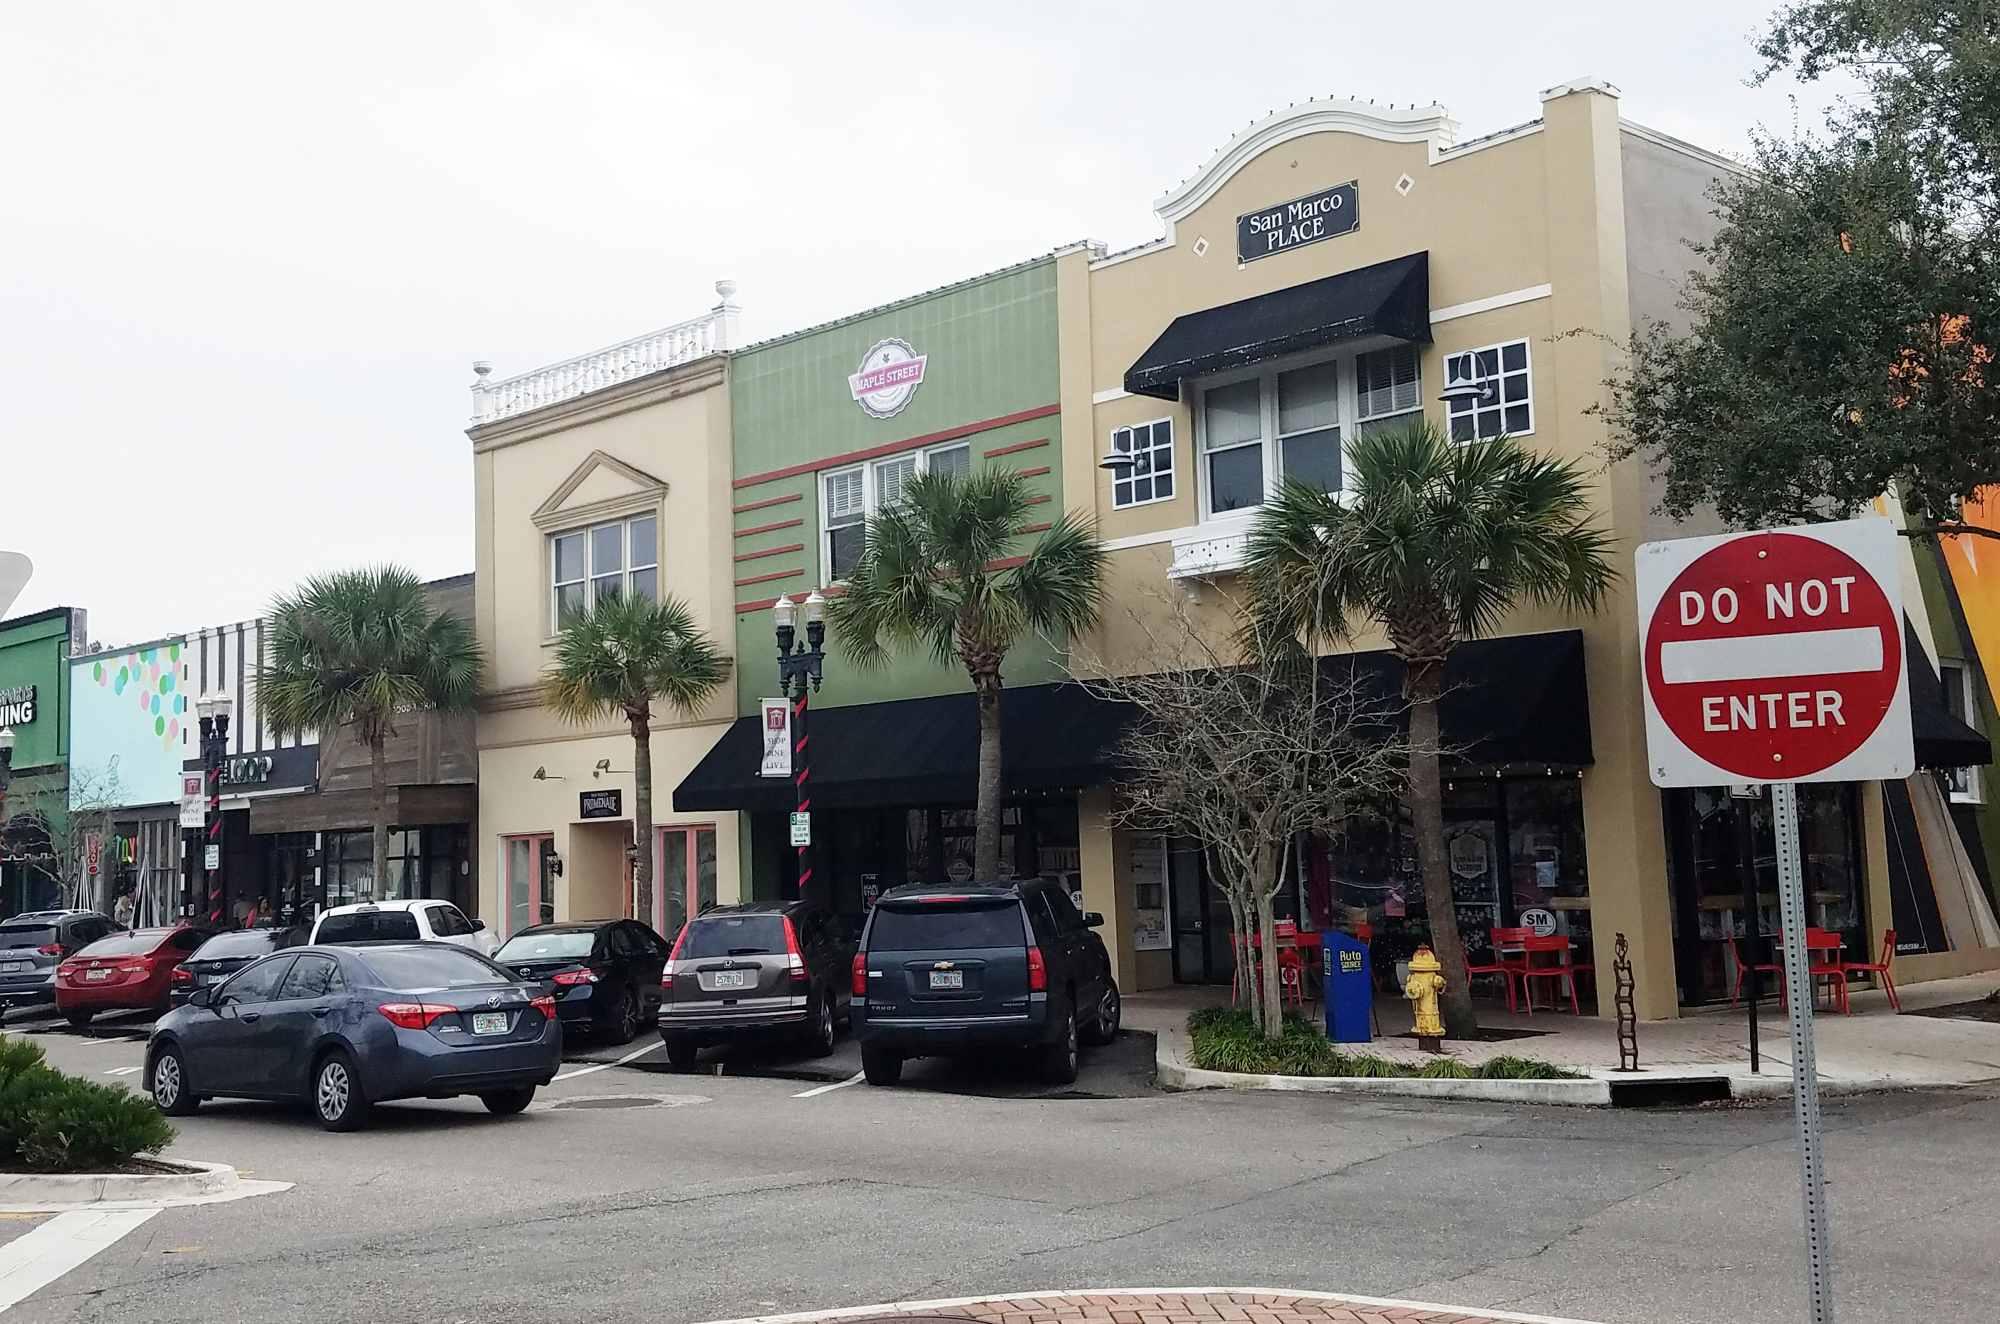 Lululemon intends to open at 2006 San Marco Blvd.  in the space to the left of  Maple Street Biscuit Company.